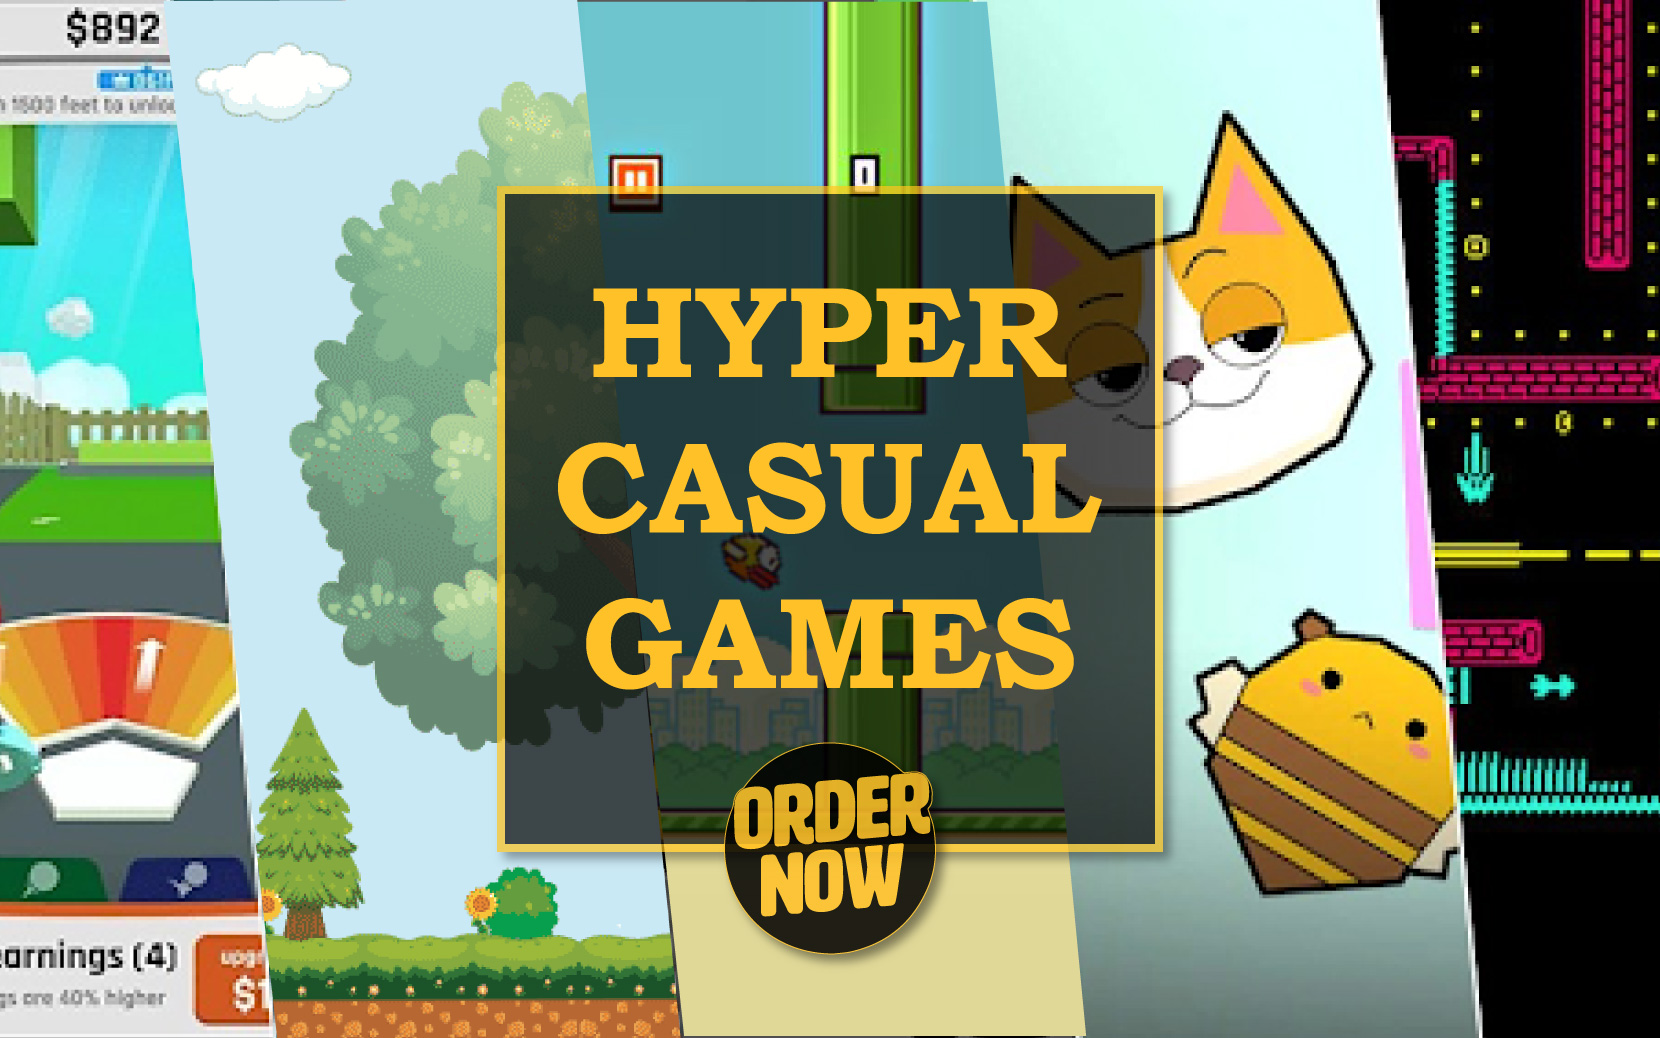 Make the hyper casual game in unity 2d,3d with admob integrations